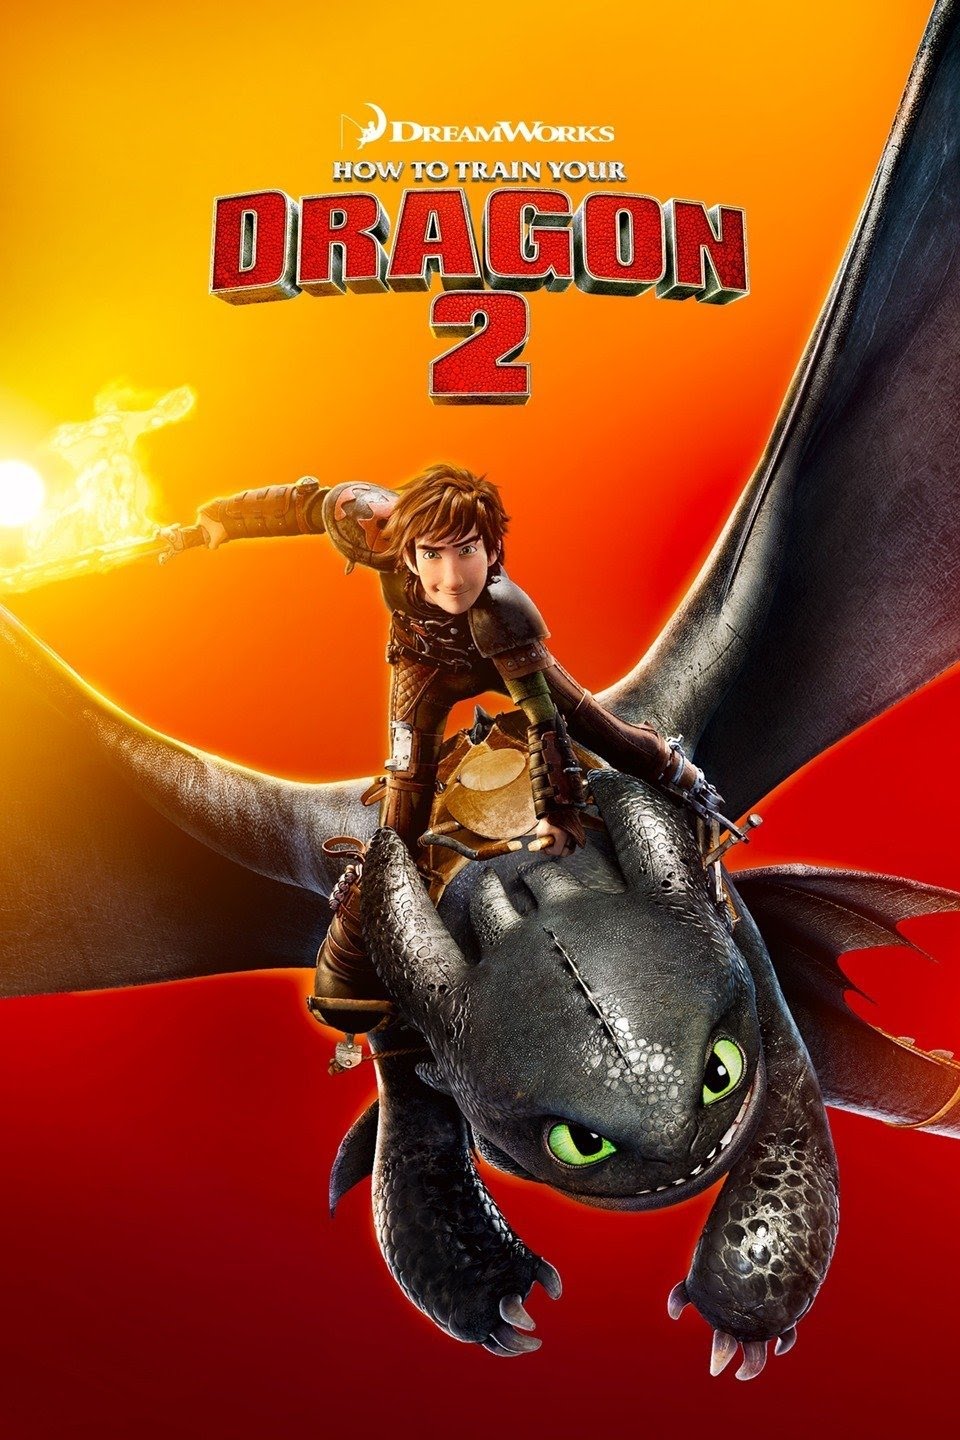 How To Train Your Dragon 2 (2014) Vudu or Movies Anywhere HD code